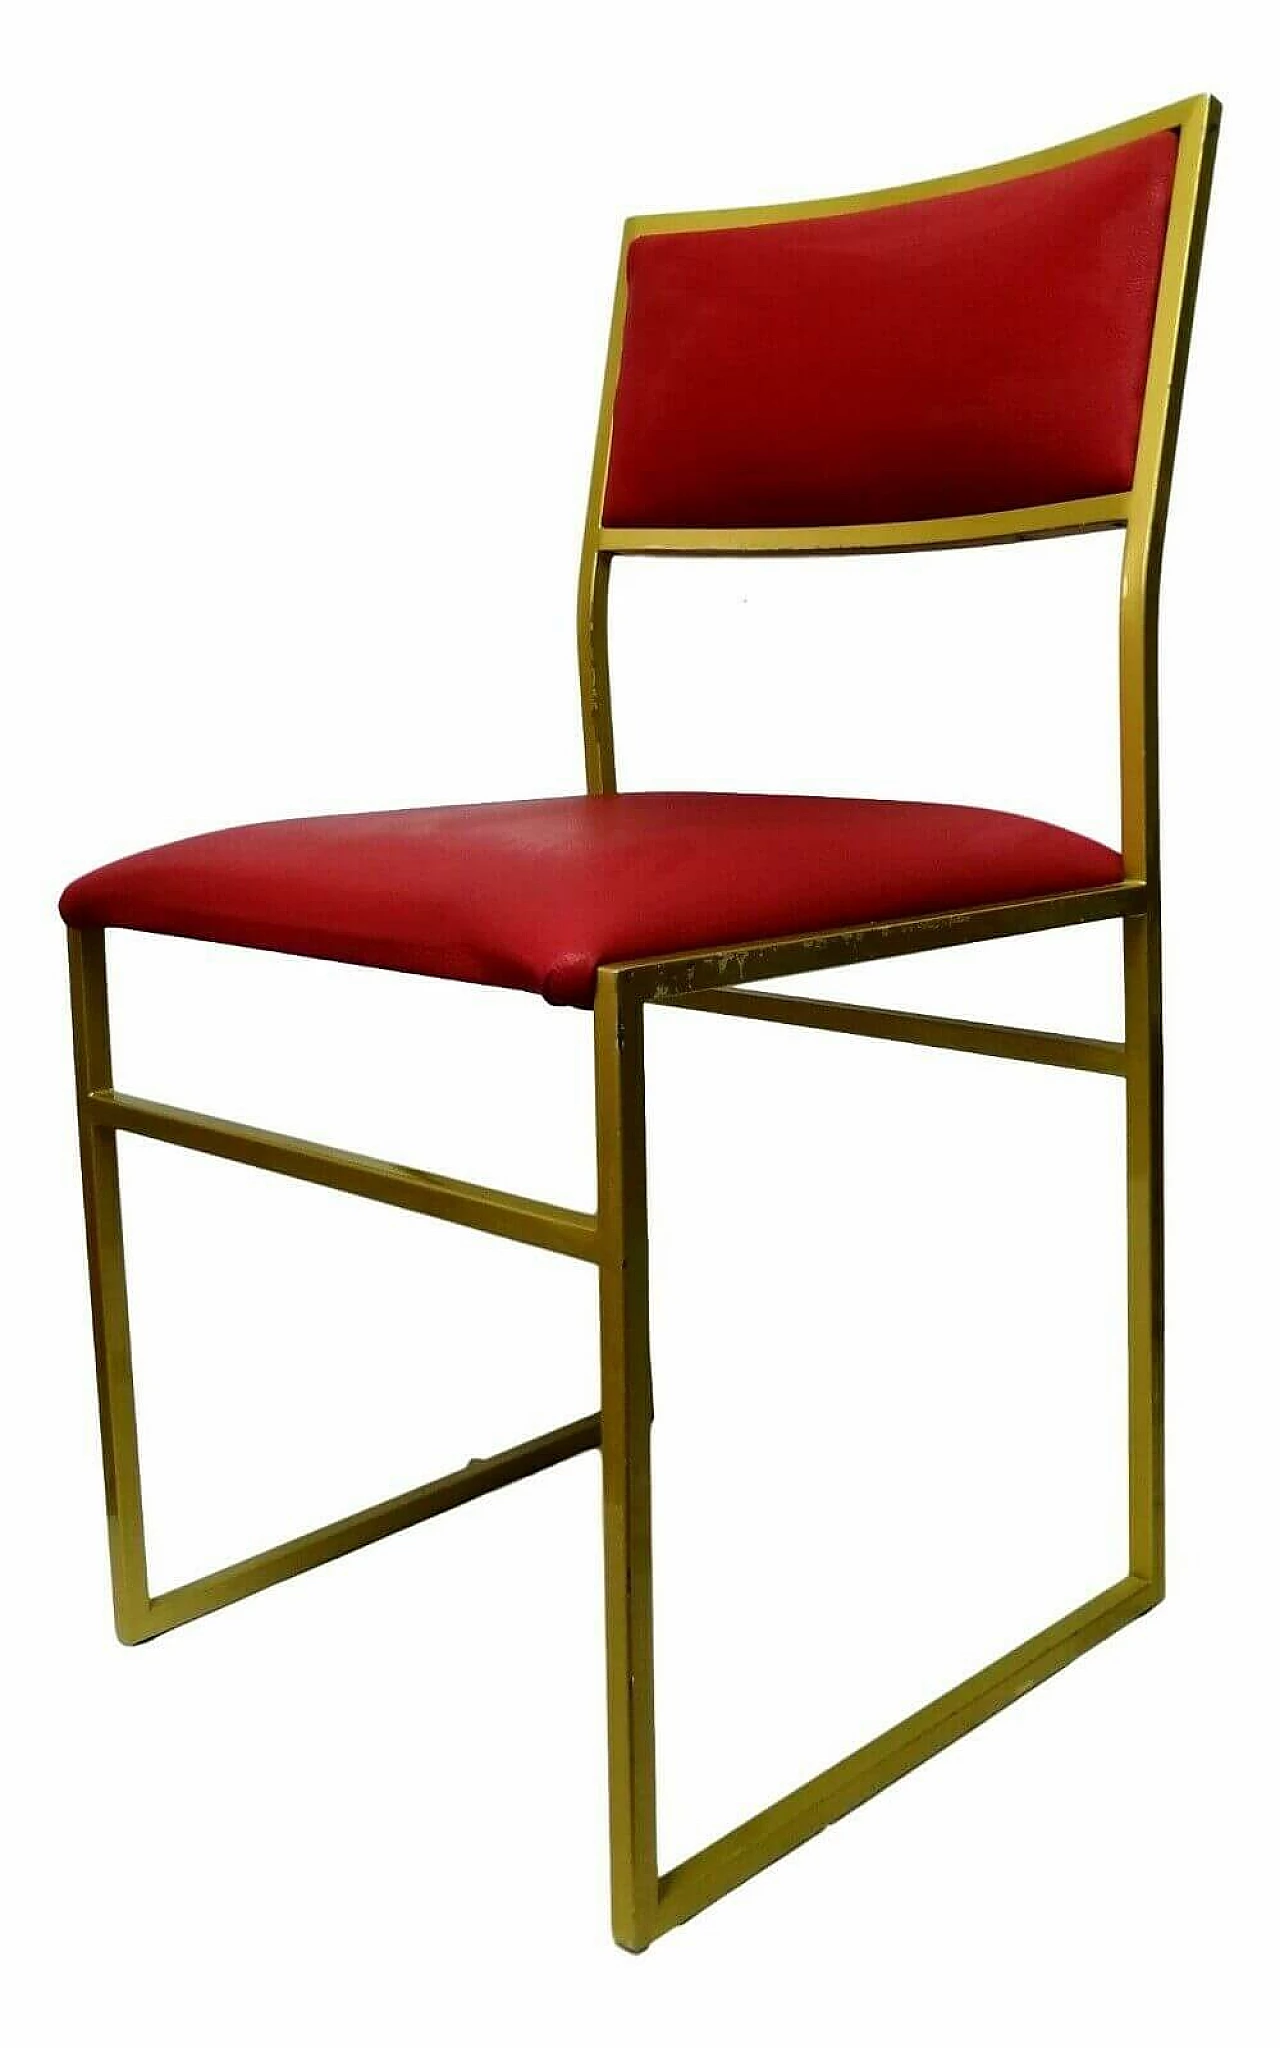 Metal chair and seat in burgundy color, 70's 1166251